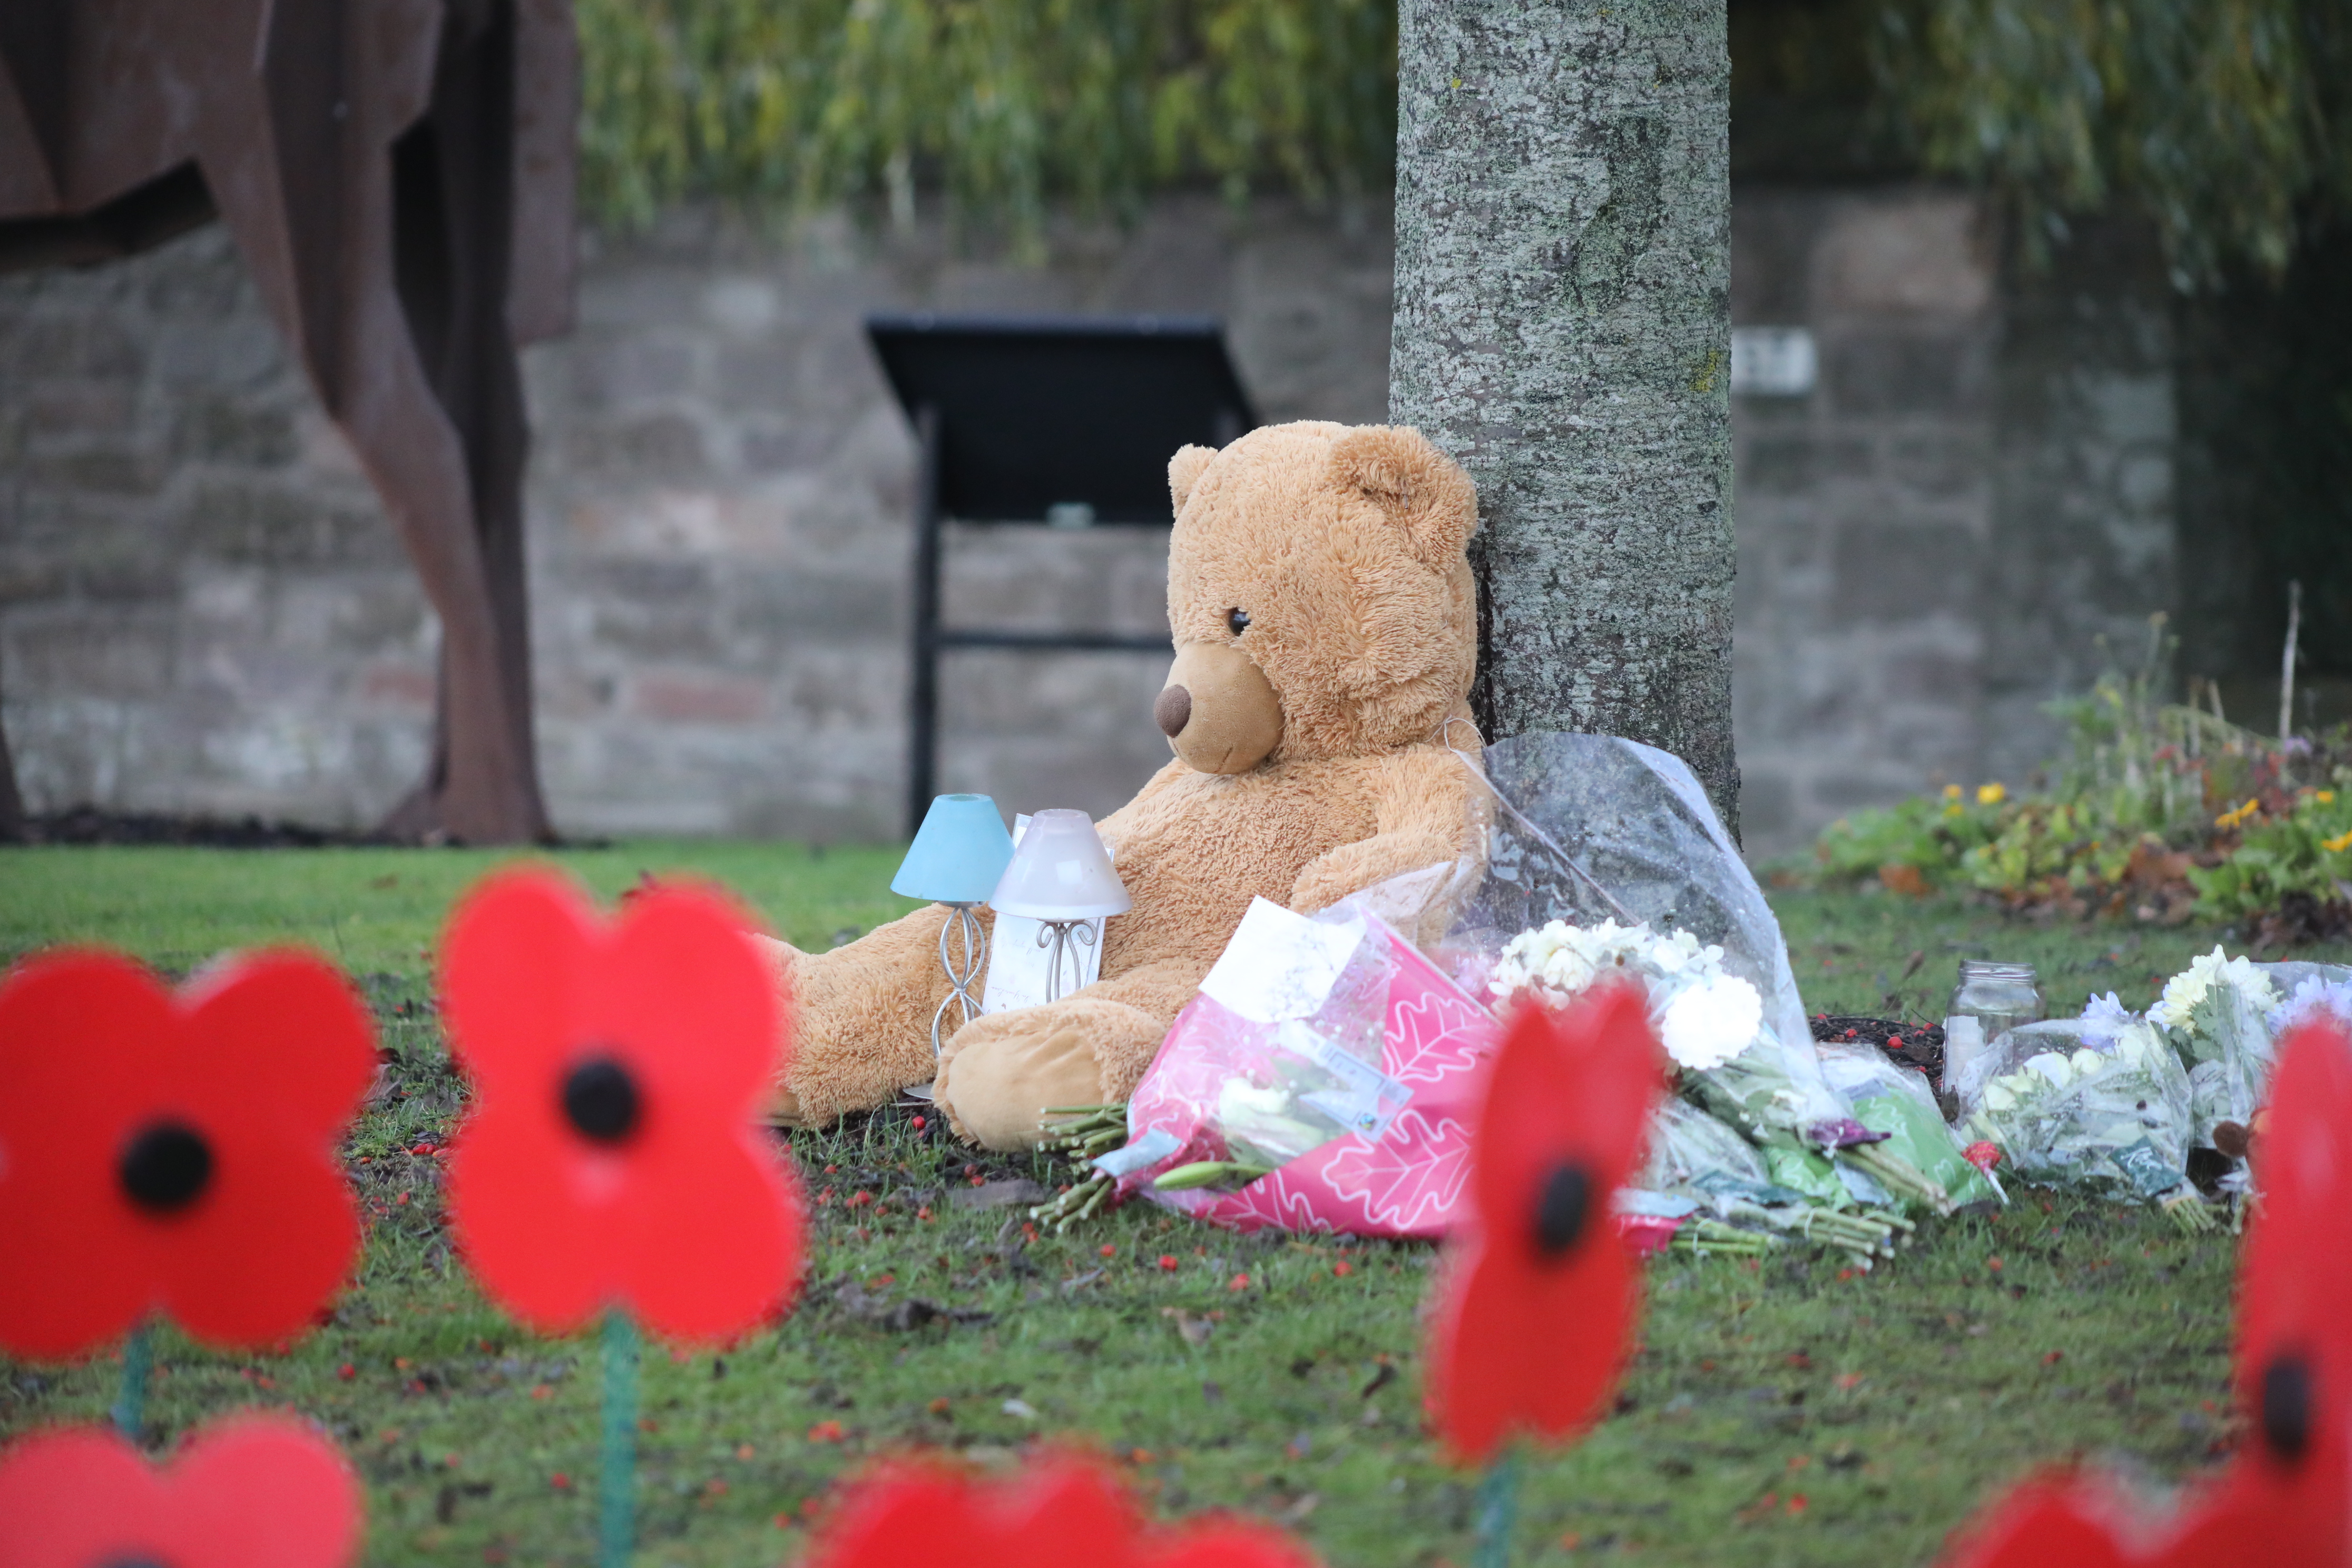 Floral tributes and teddy bears were left in tribute to Kane as his classmates returned to Coupar Angus Primary School after the weekend.